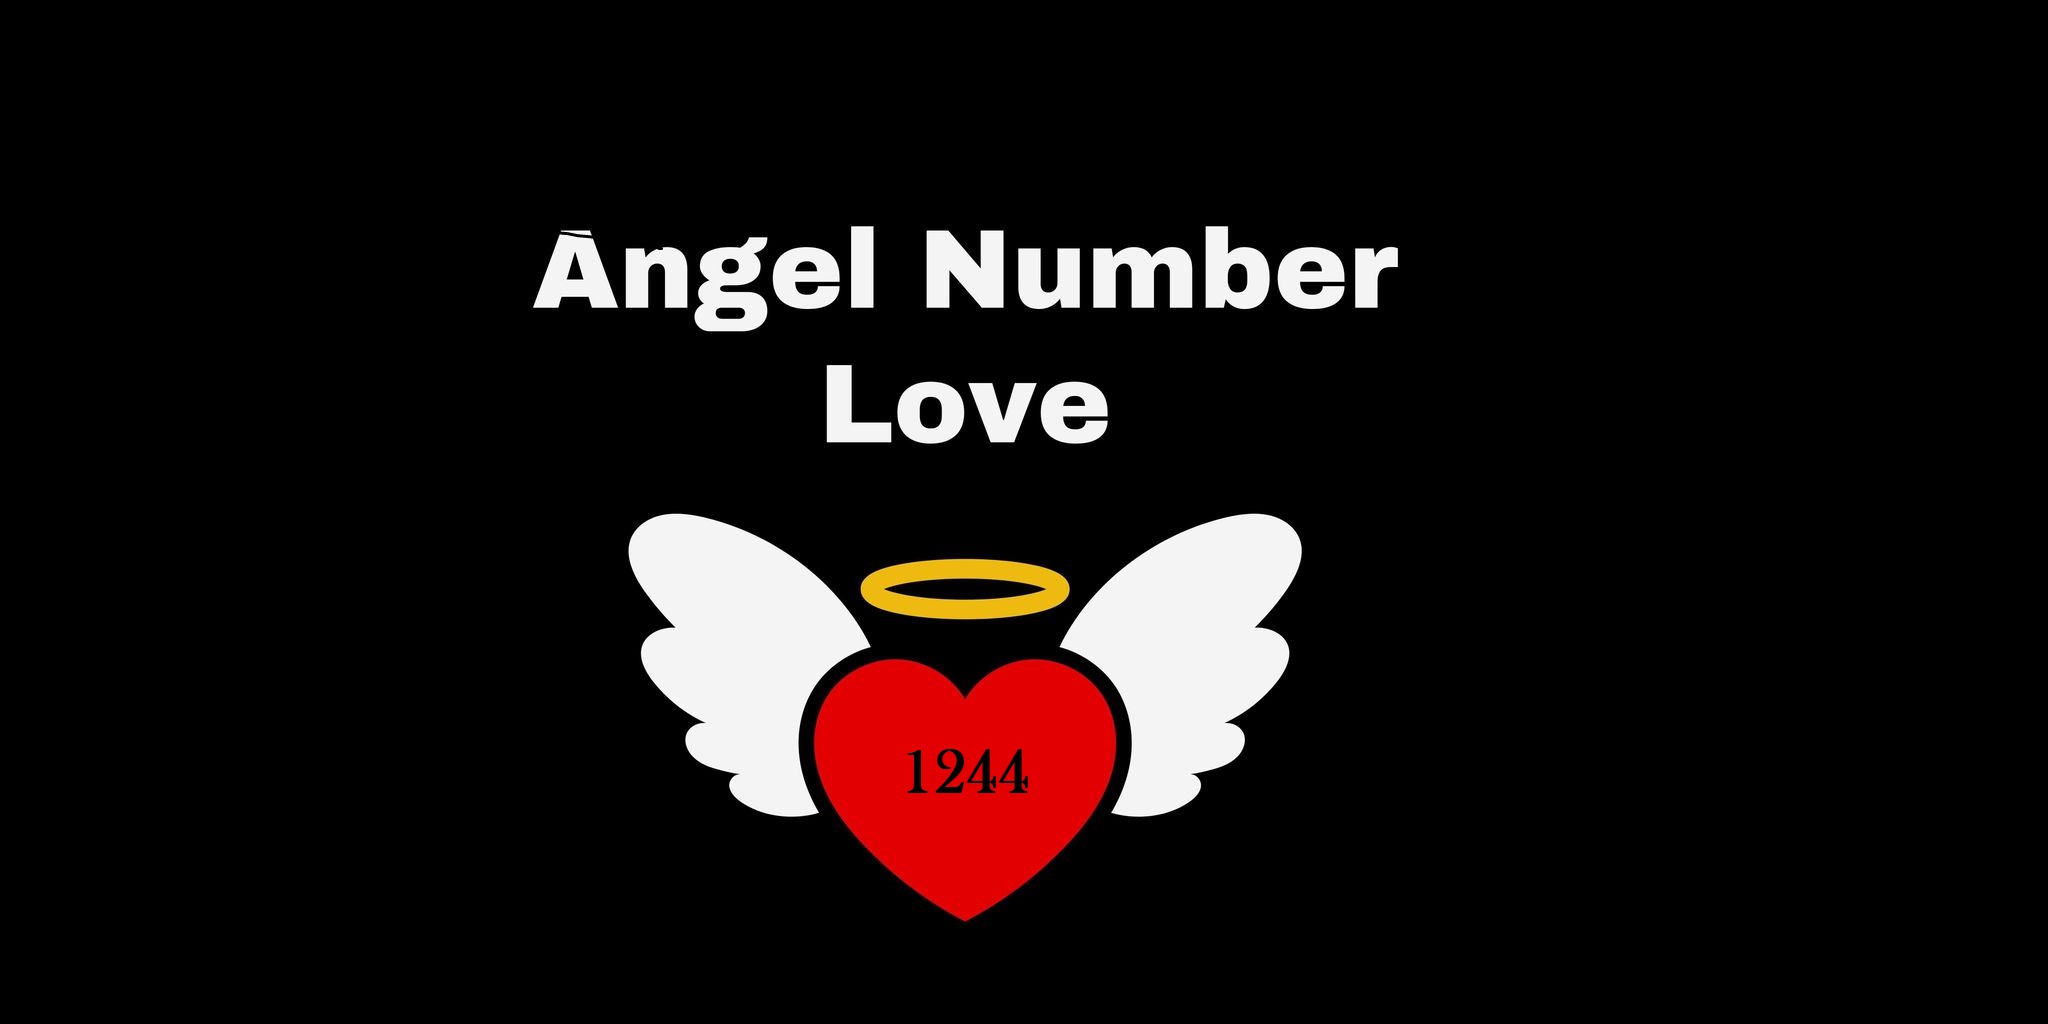 1244 Angel Number Meaning In Love & Relationship